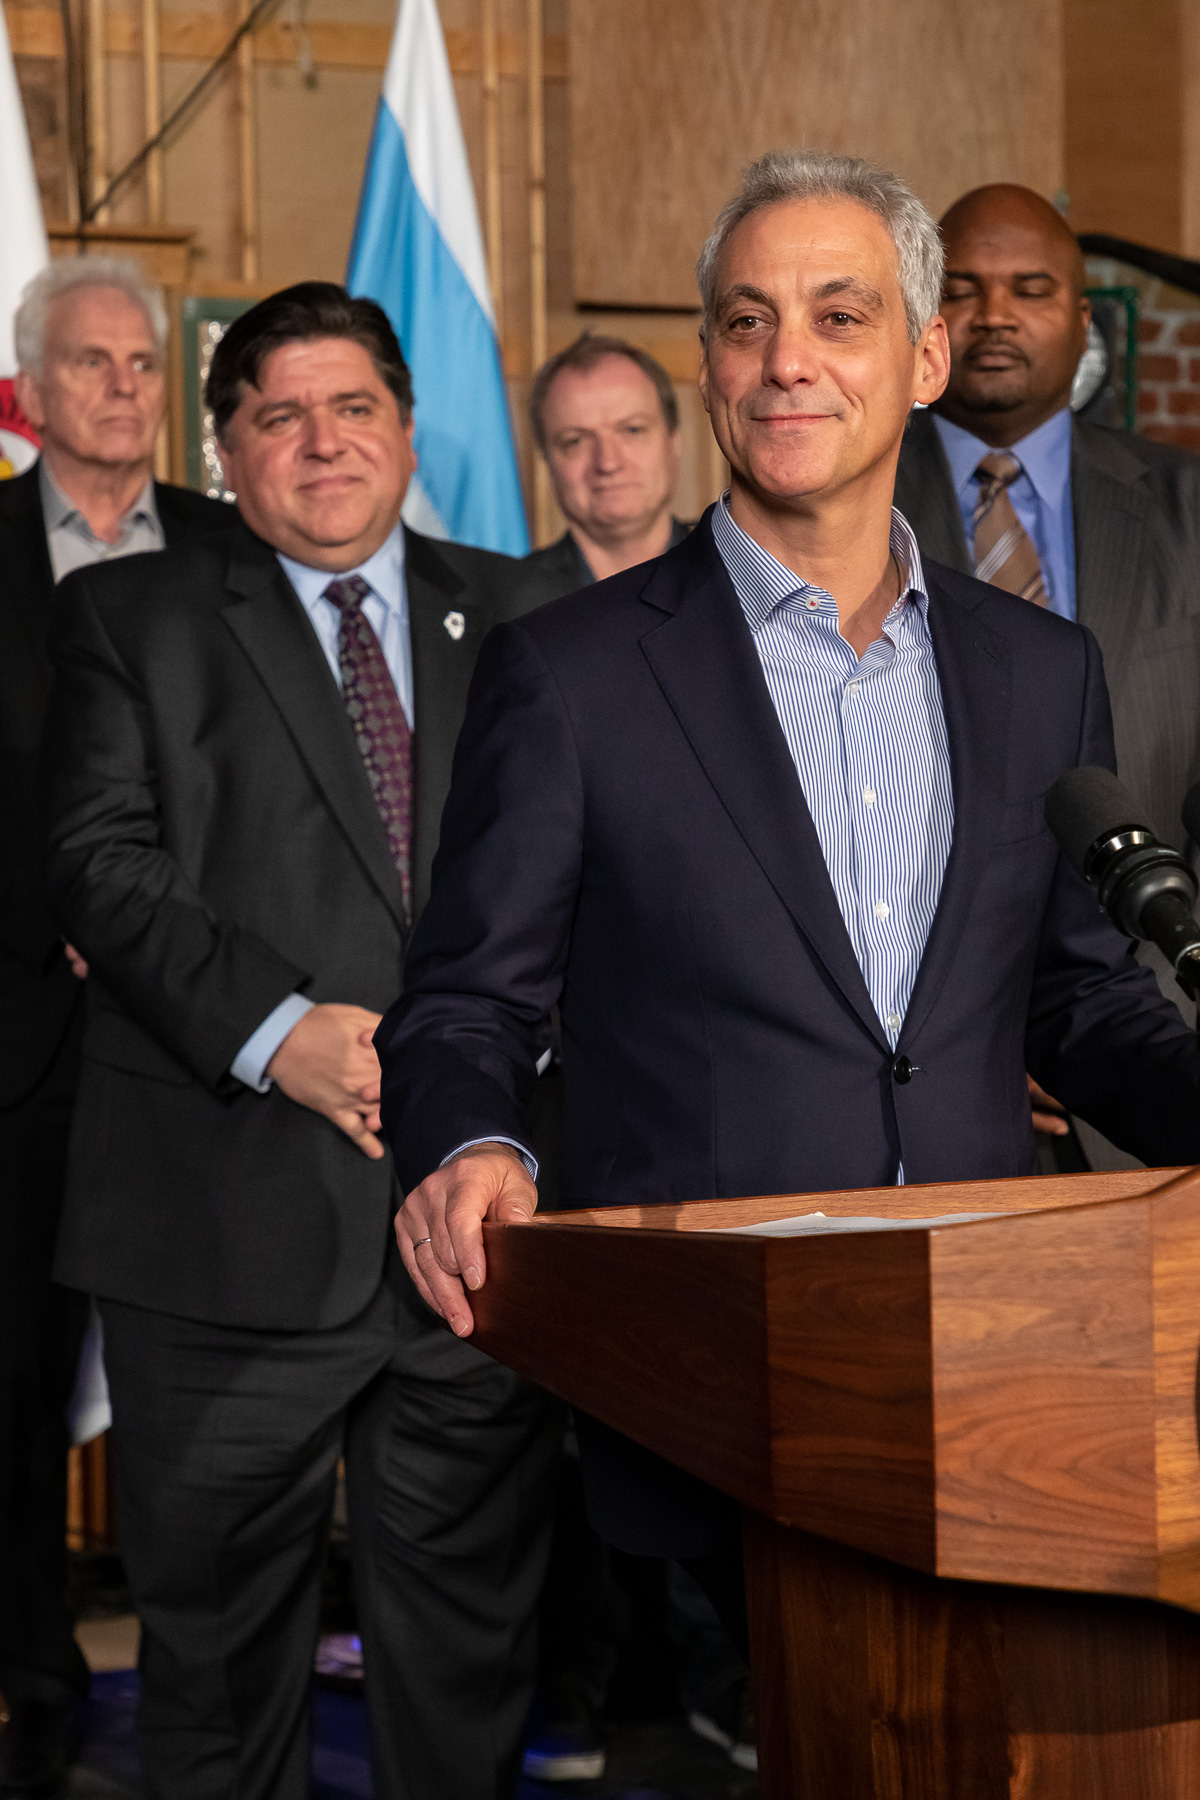 Chicago Mayor Rahm Emanuel, right, and Illinois Governor JB Pritzker, attend a press conference at Cinespace Chicago Film Studios and DePaul University’s School of Cinematic Arts, Thursday, Feb. 28, 2019. (DePaul University/Jeff Carrion)